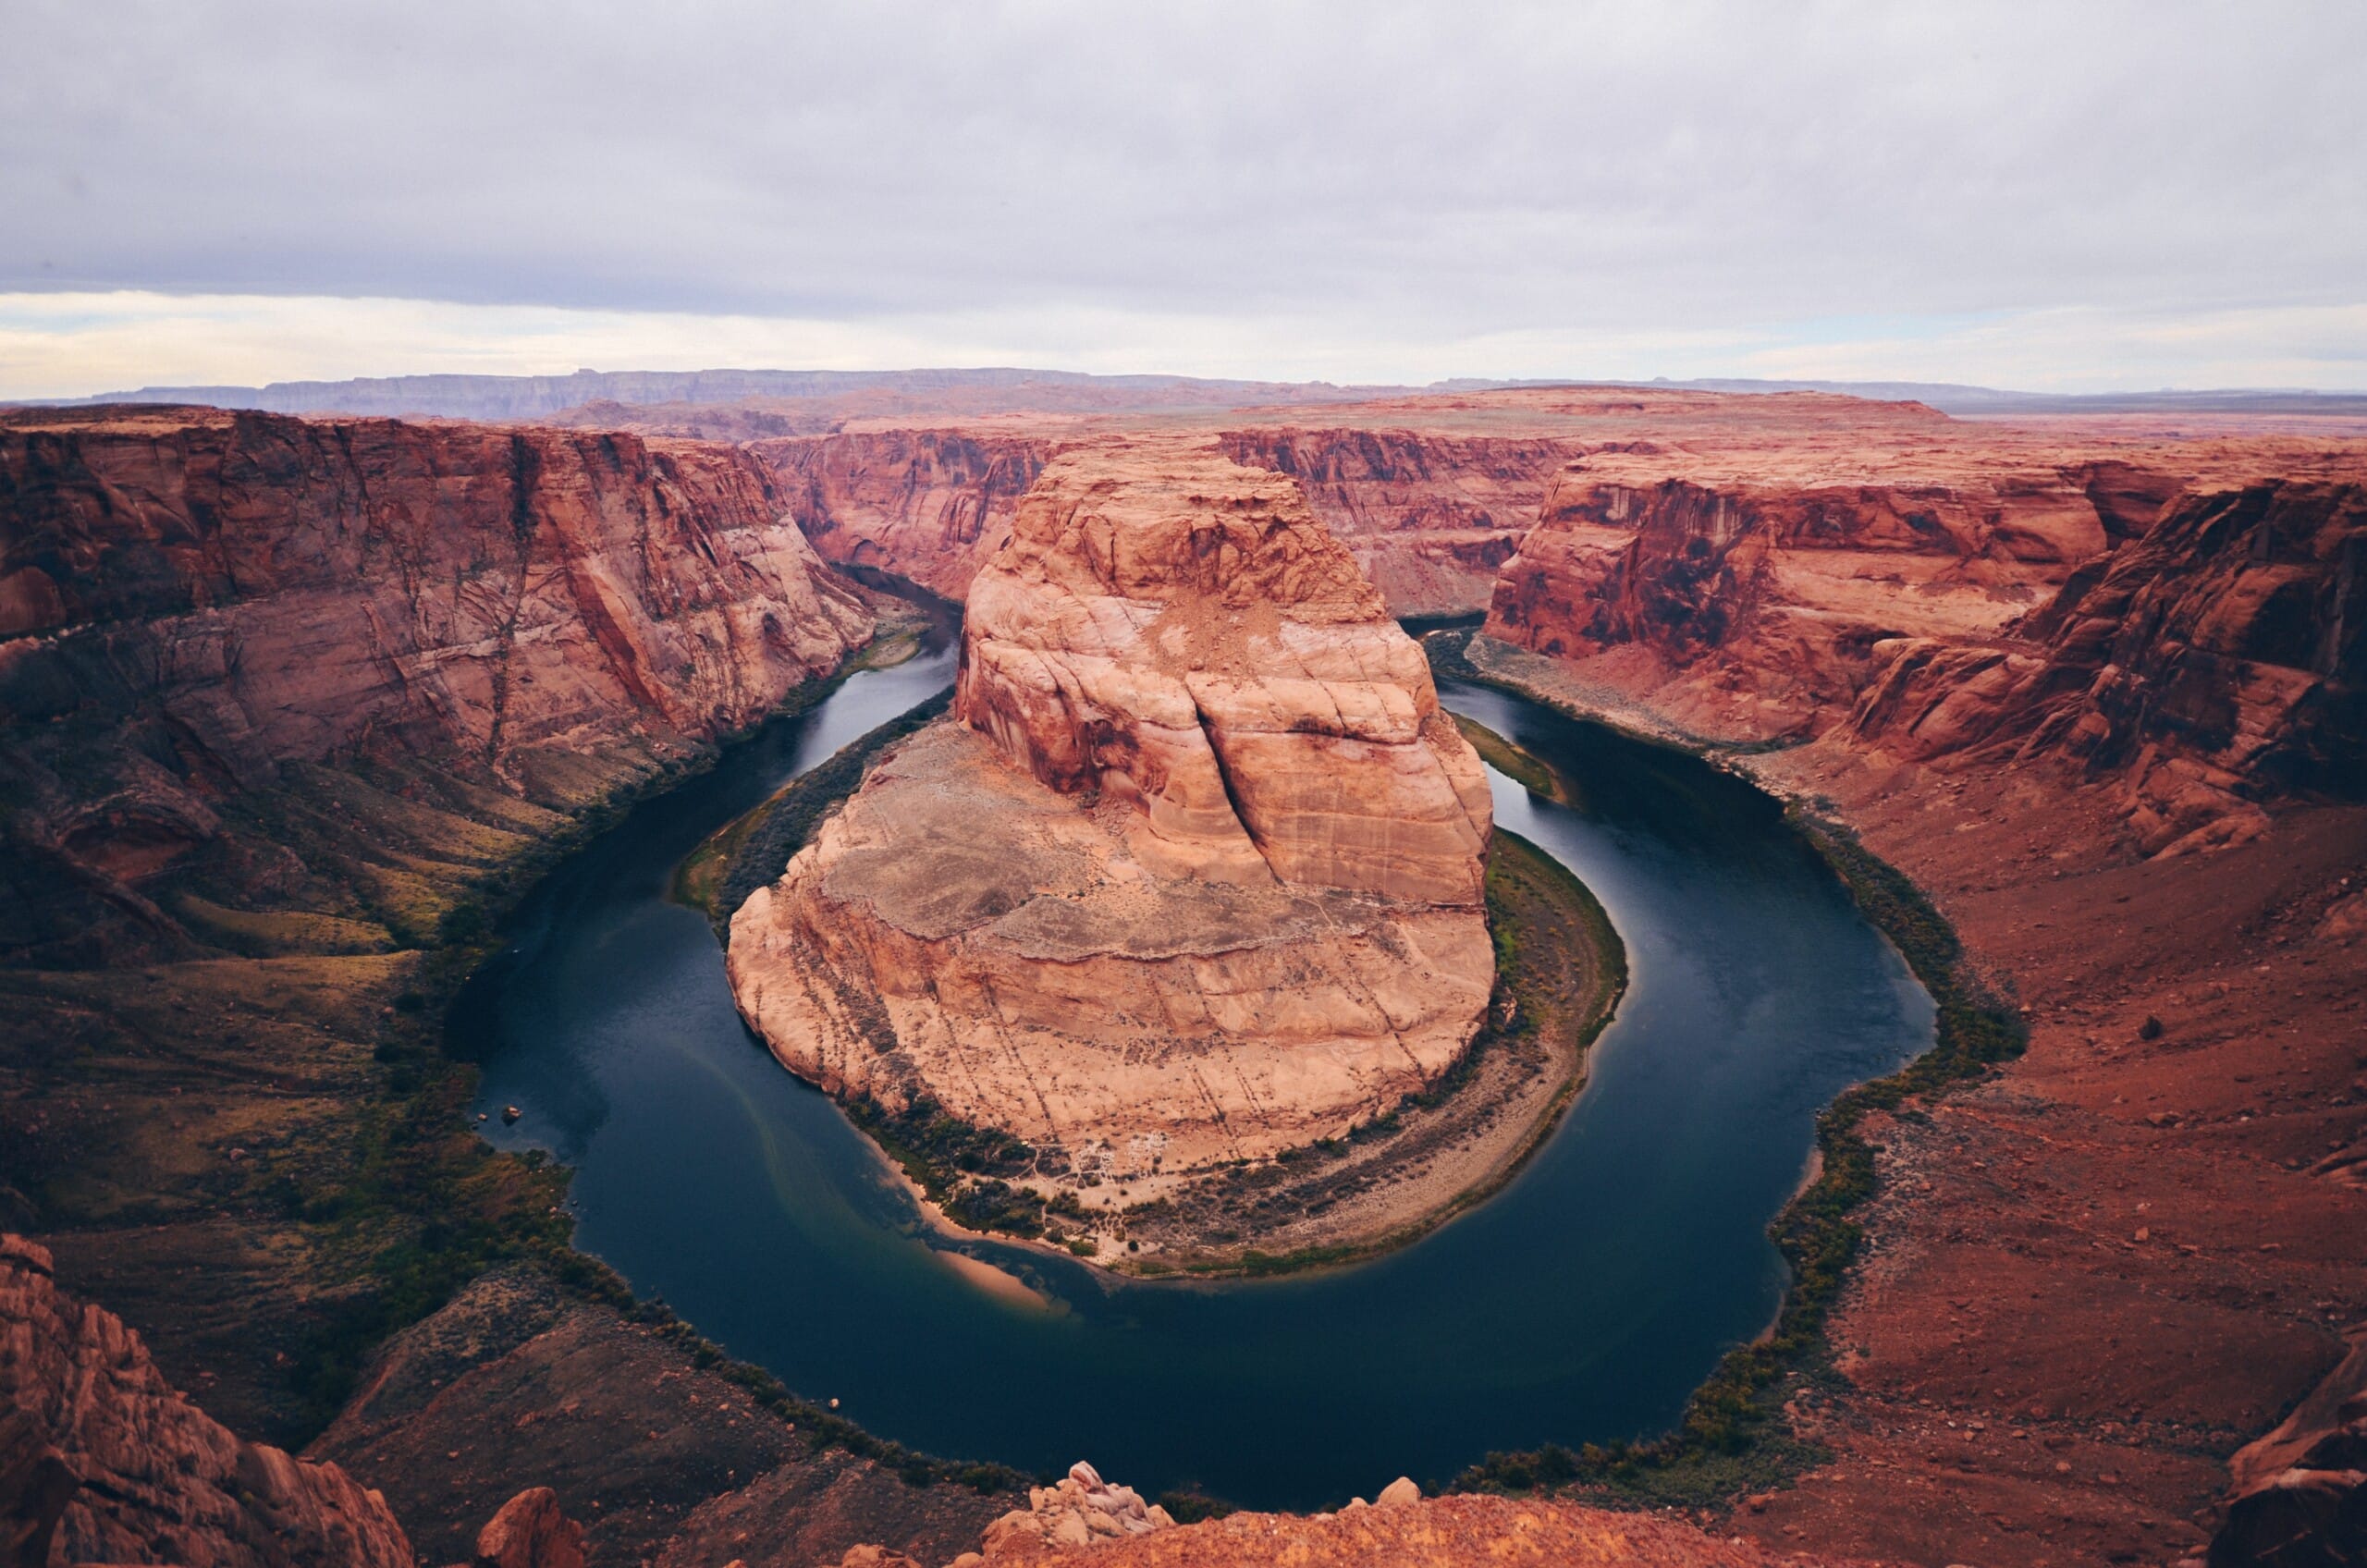 Person sitting on edge of the canyon at Horseshoe Bend